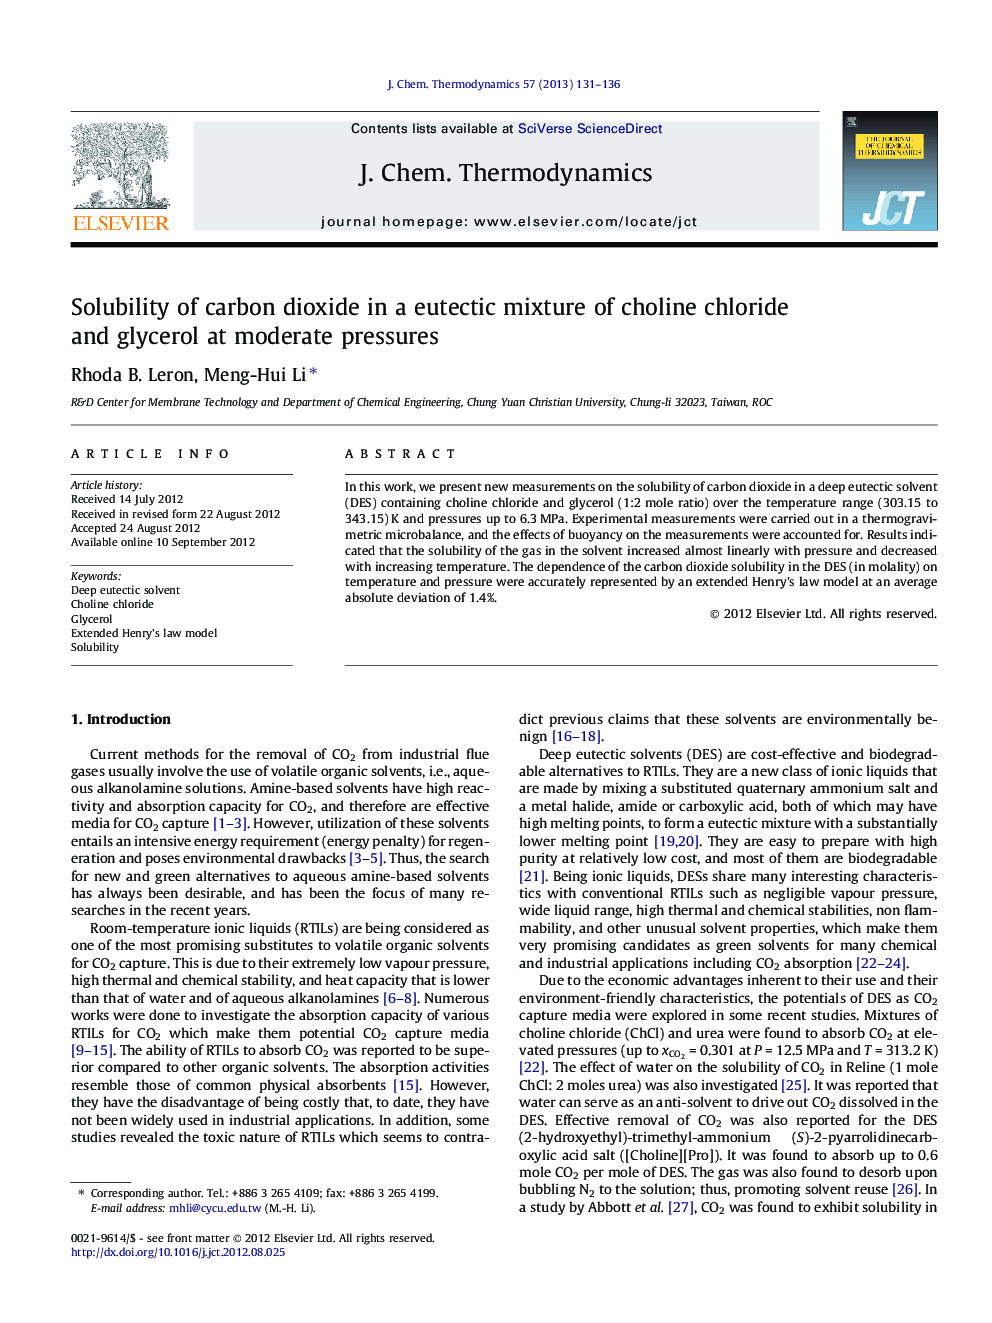 Solubility of carbon dioxide in a eutectic mixture of choline chloride and glycerol at moderate pressures